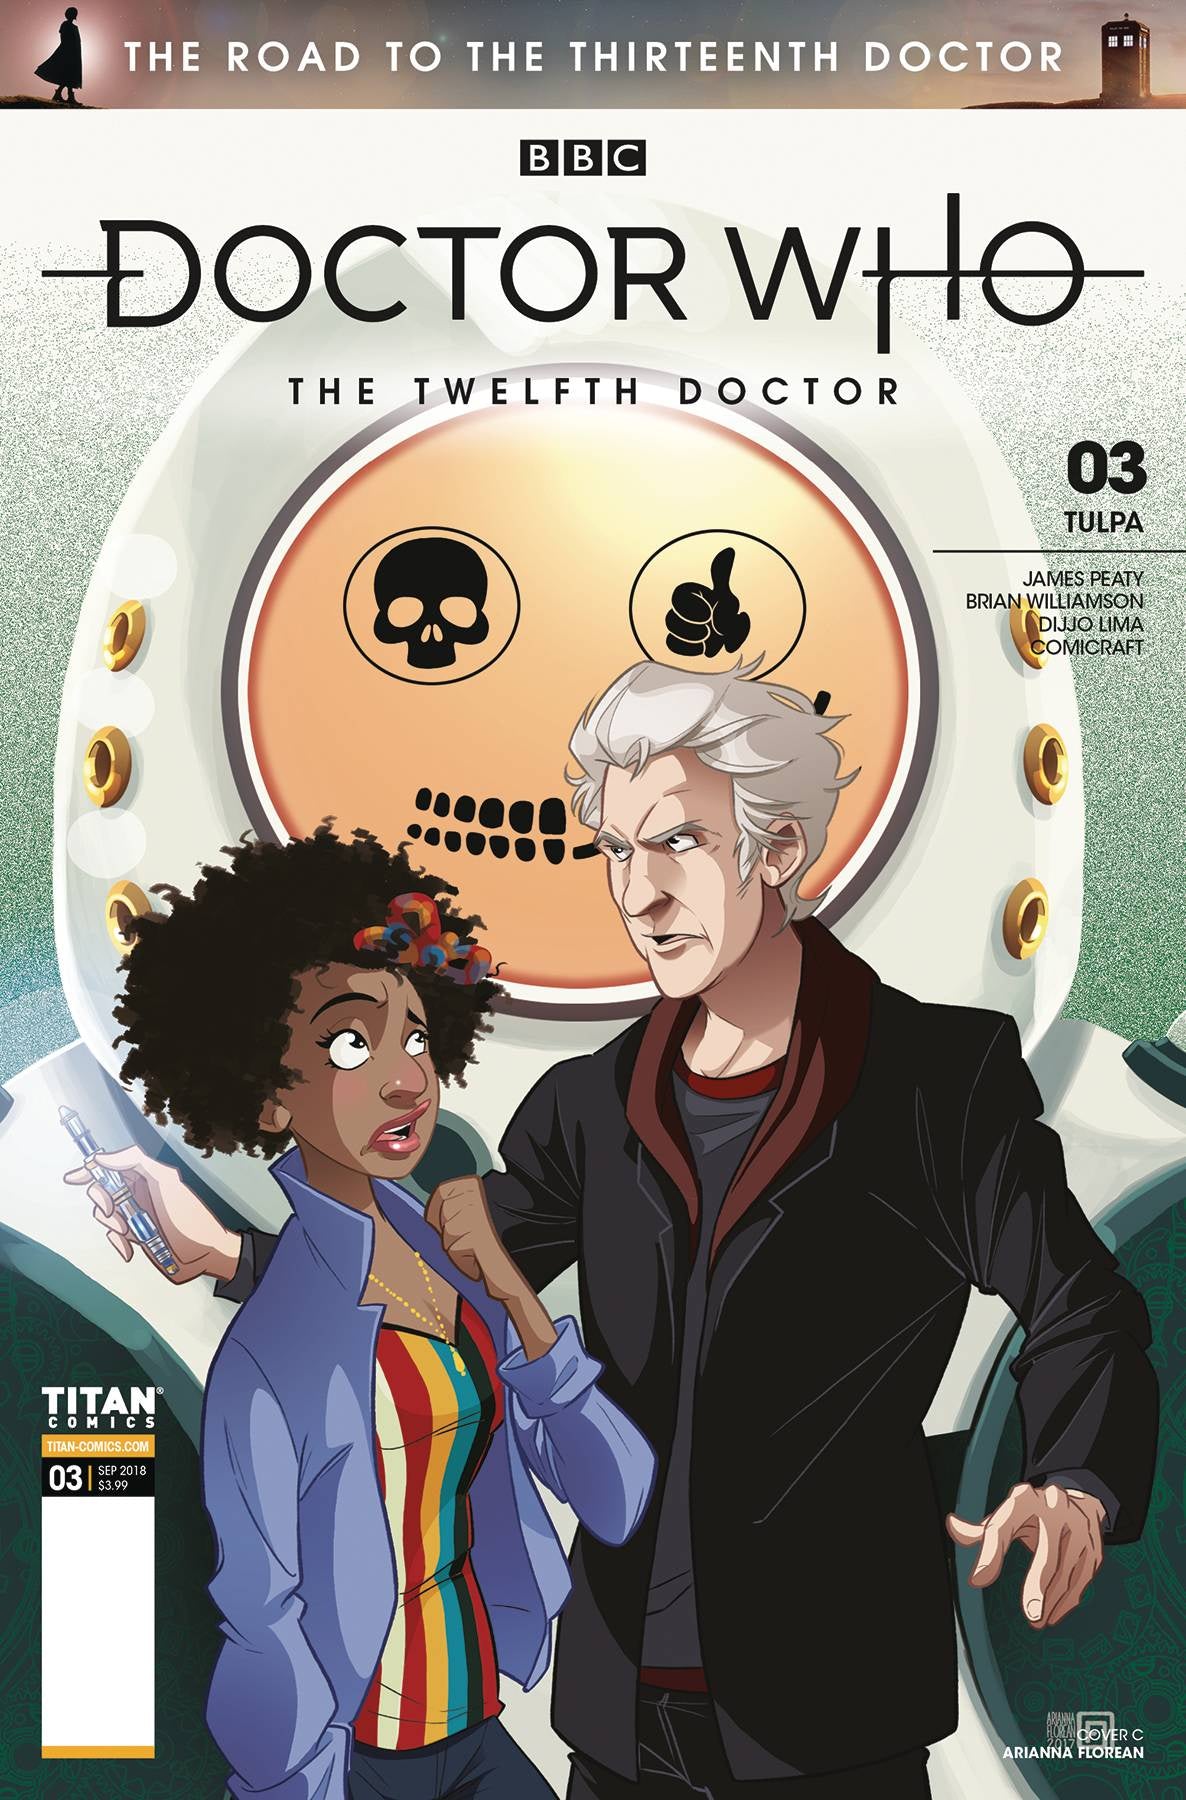 DOCTOR WHO ROAD TO 13TH DR #3 12TH CVR C FLOREAN